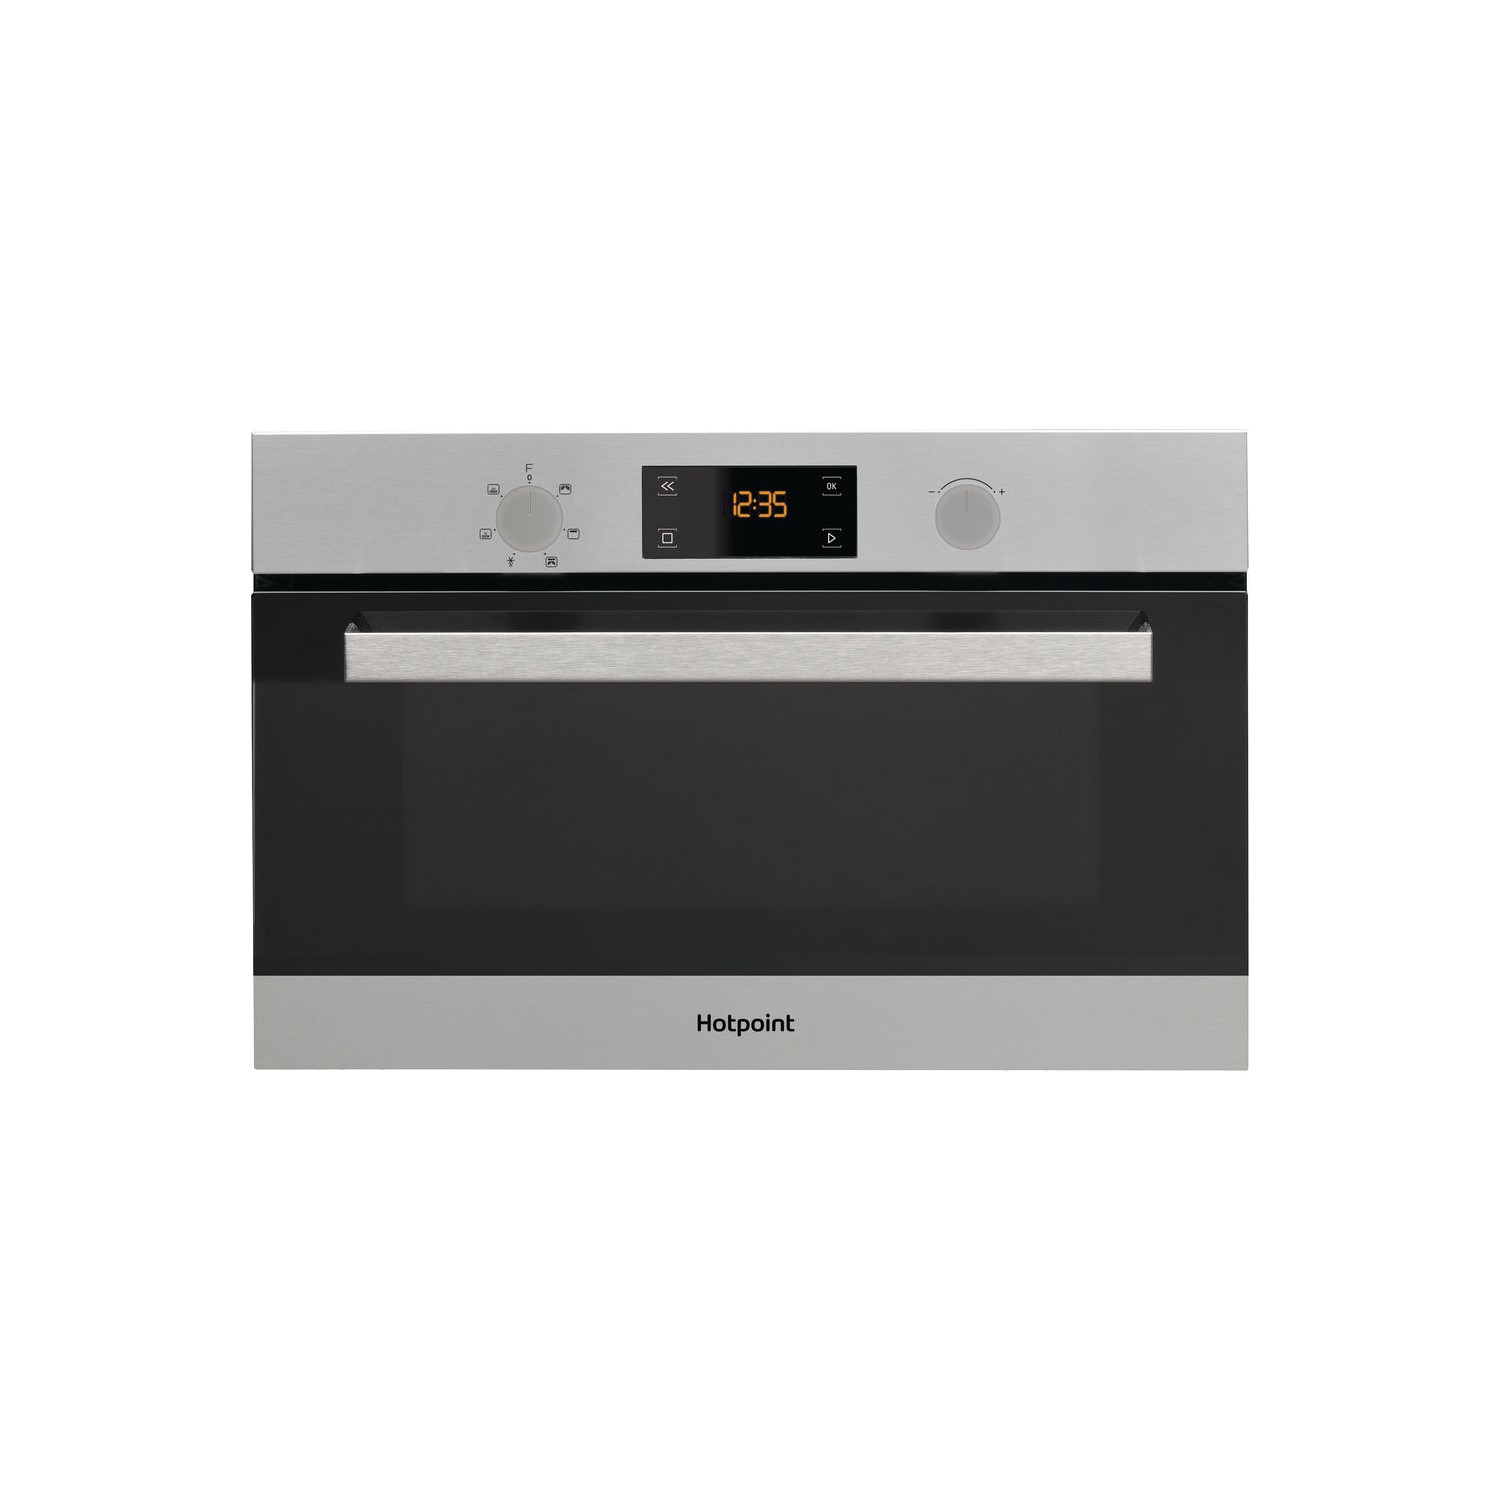 Refurbished Hotpoint MD344IXH Built In 31L with Grill 1000W Microwave Stainless Steel